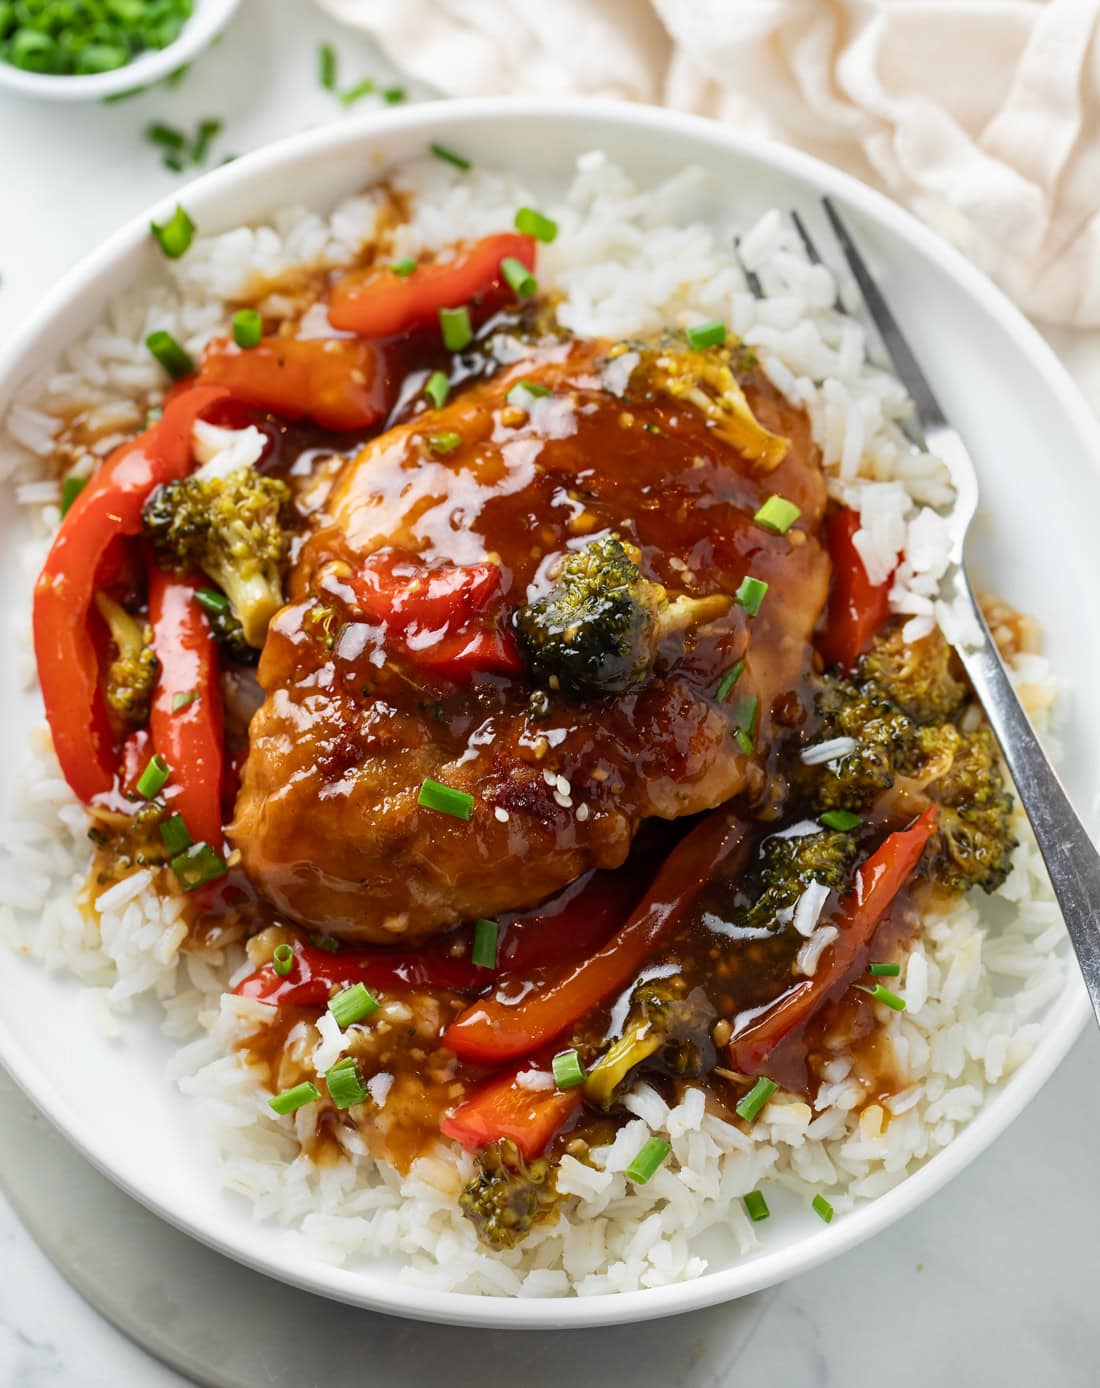 Honey Garlic Chicken on a bed of white rice with glaze and vegetables.